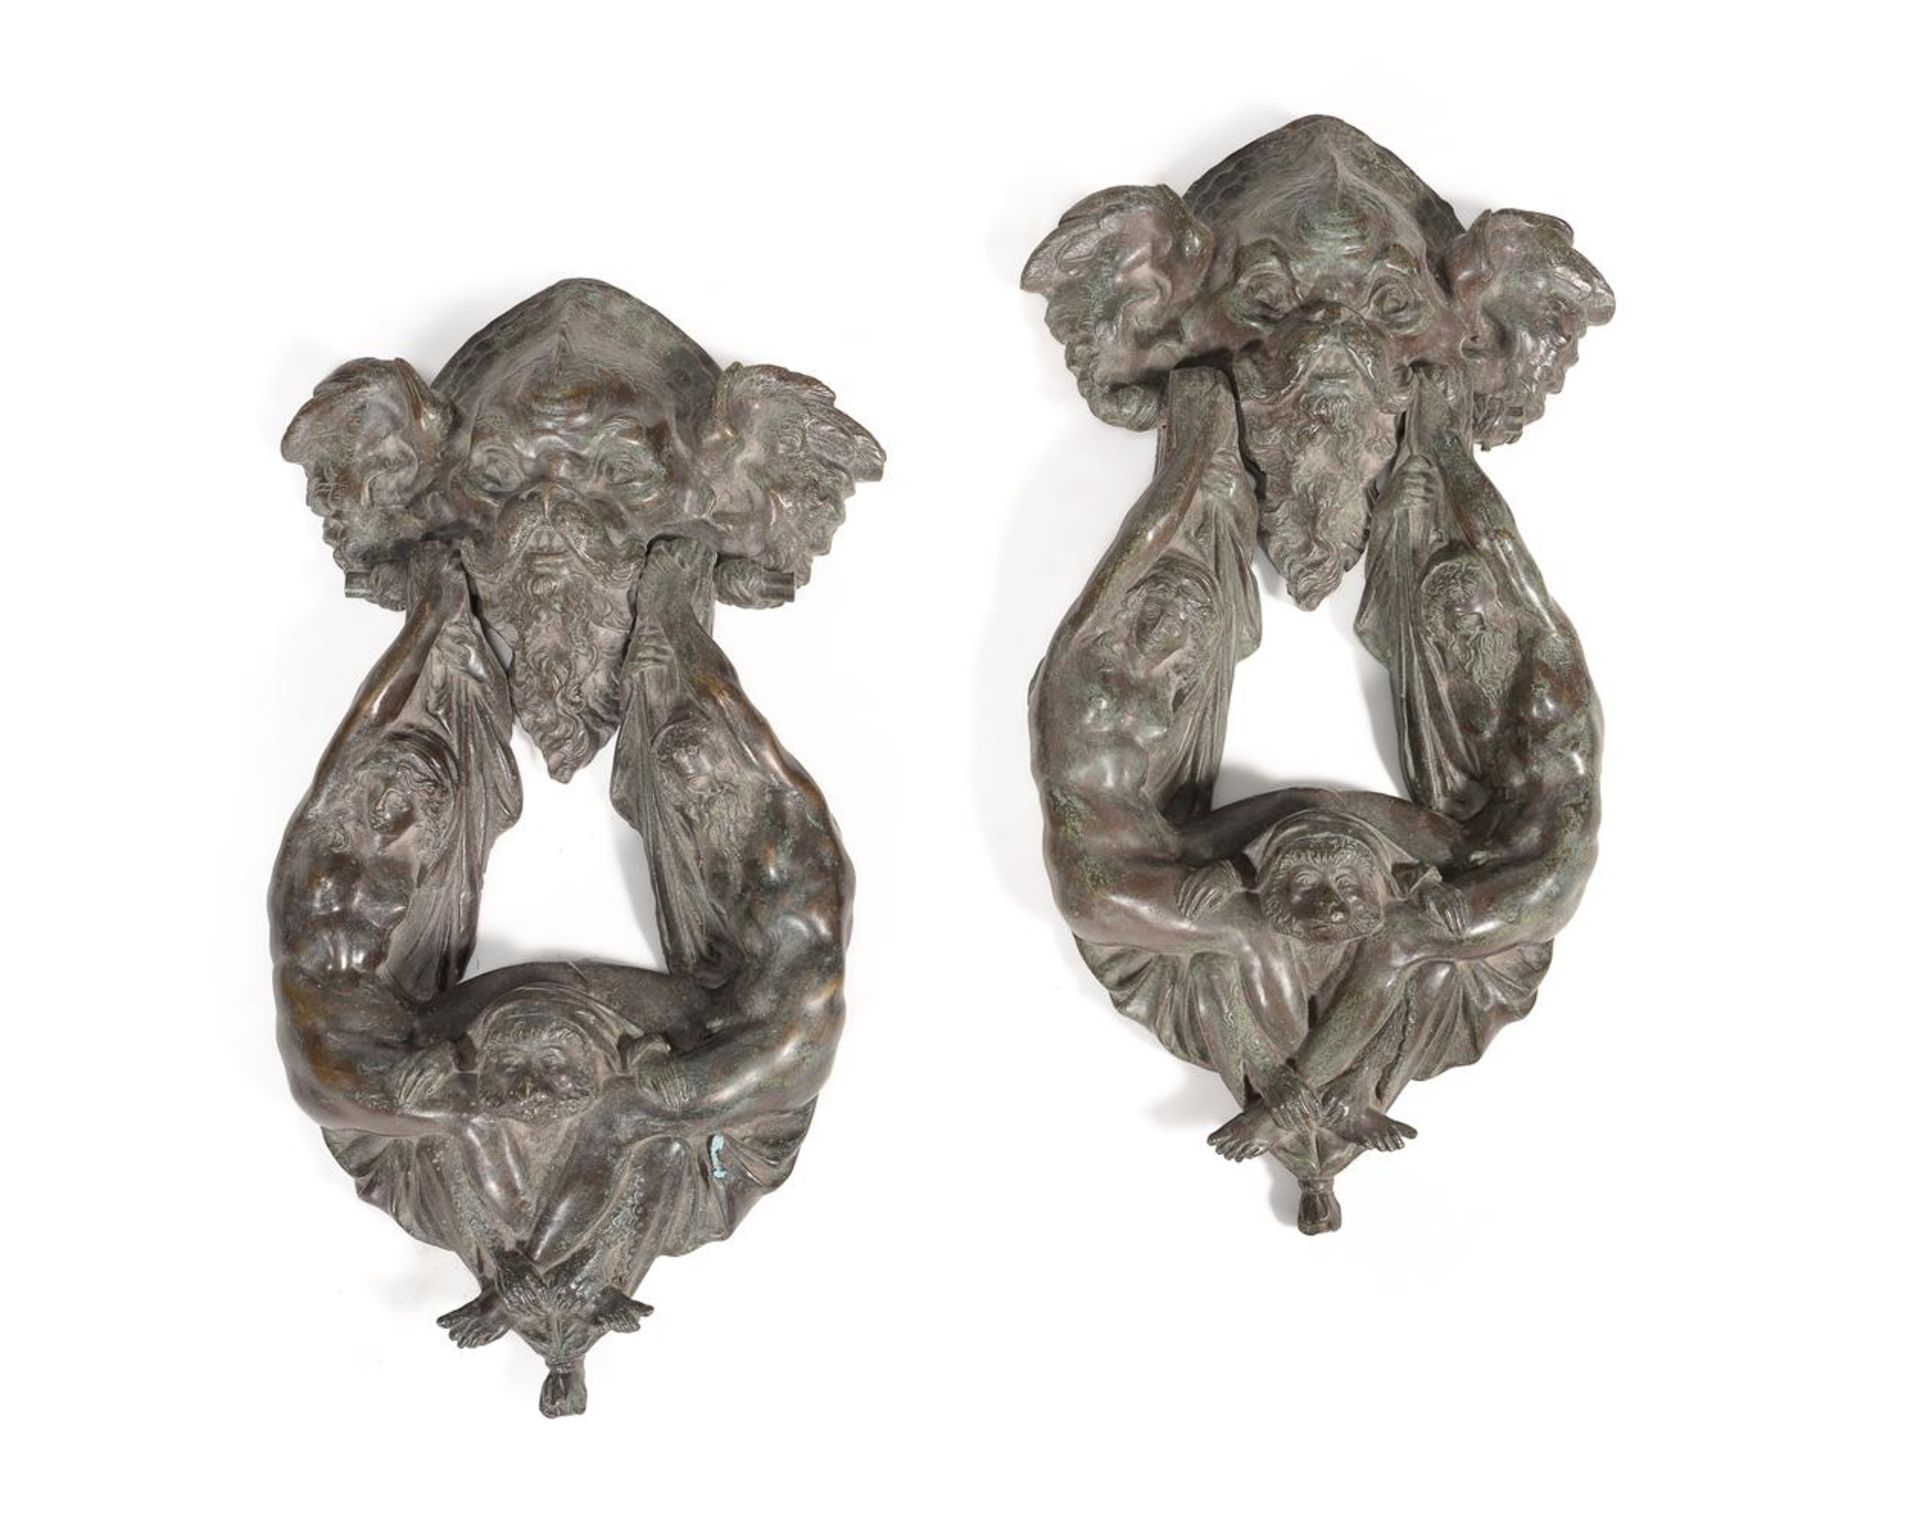 AN ORNATE LARGE PAIR OF BRONZED DOOR KNOCKERS, PROBABLY 19TH CENTURY, ITALIAN